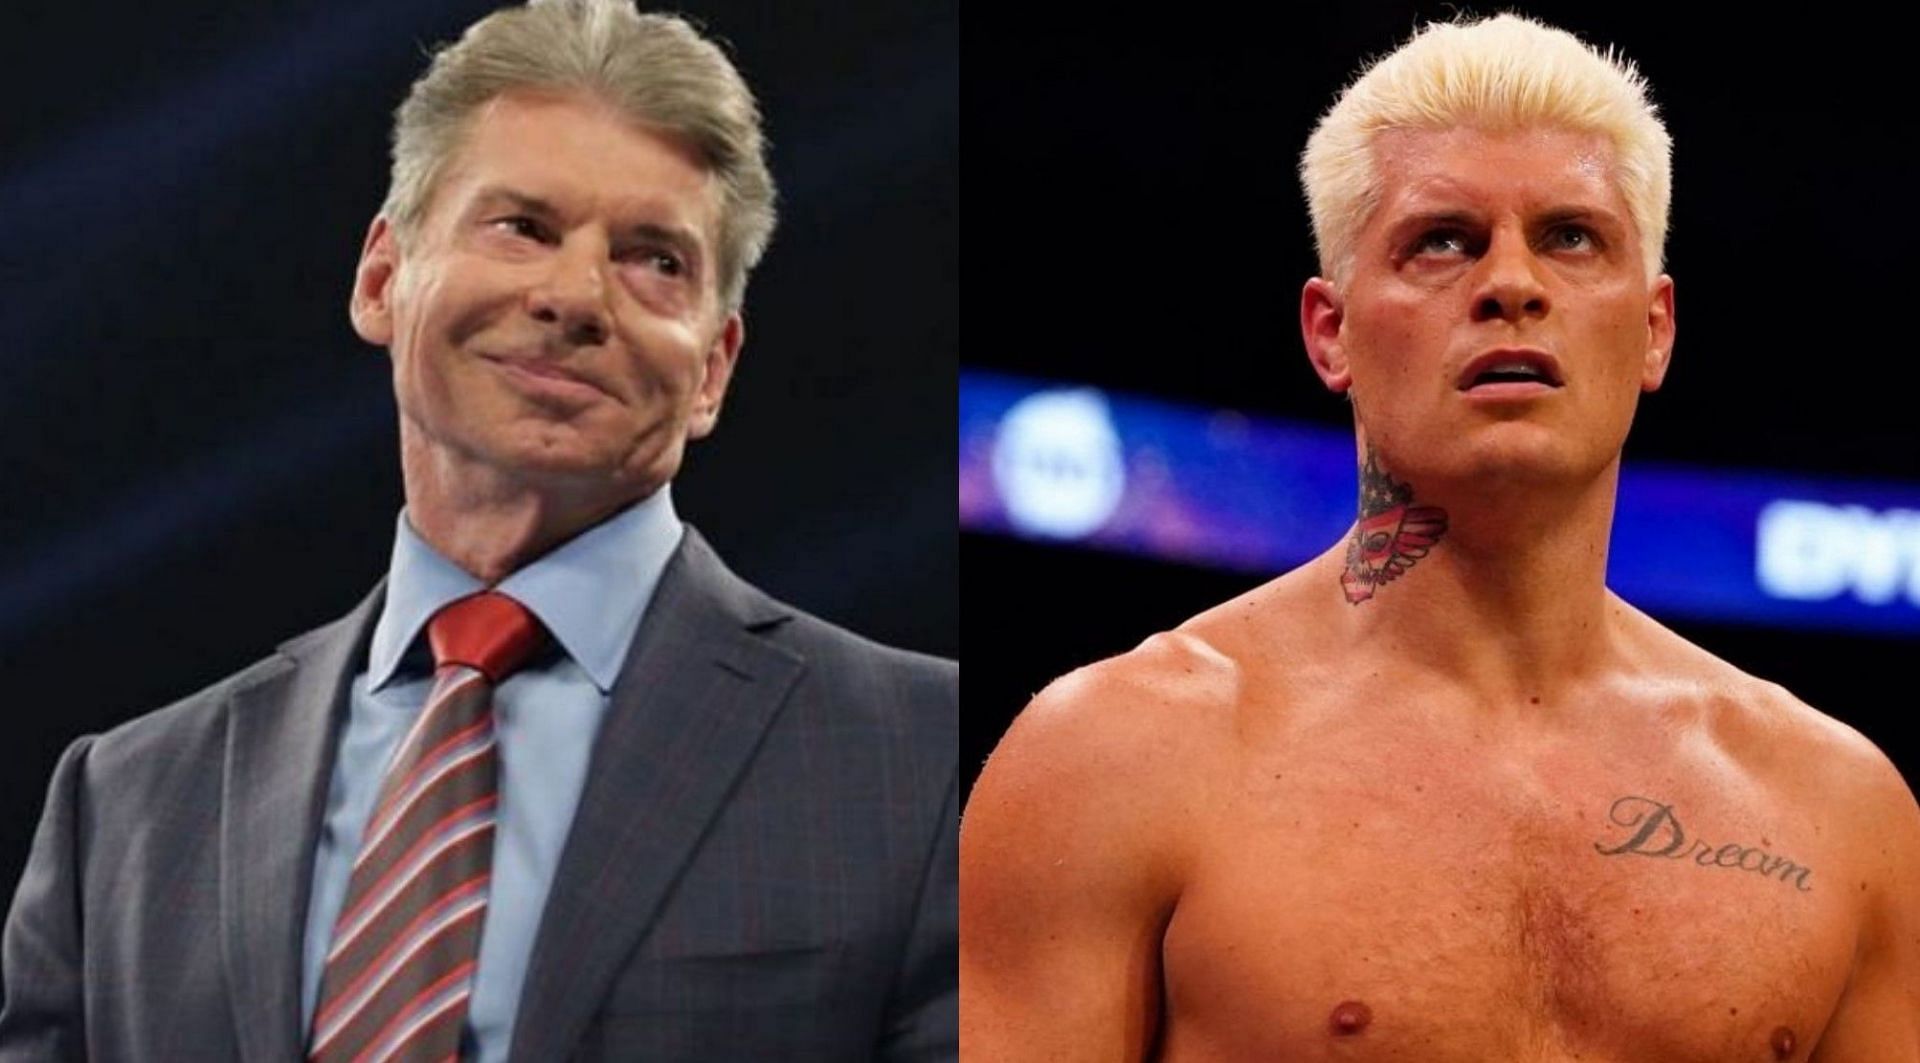 Vince McMahon (left) and Cody Rhodes (right)